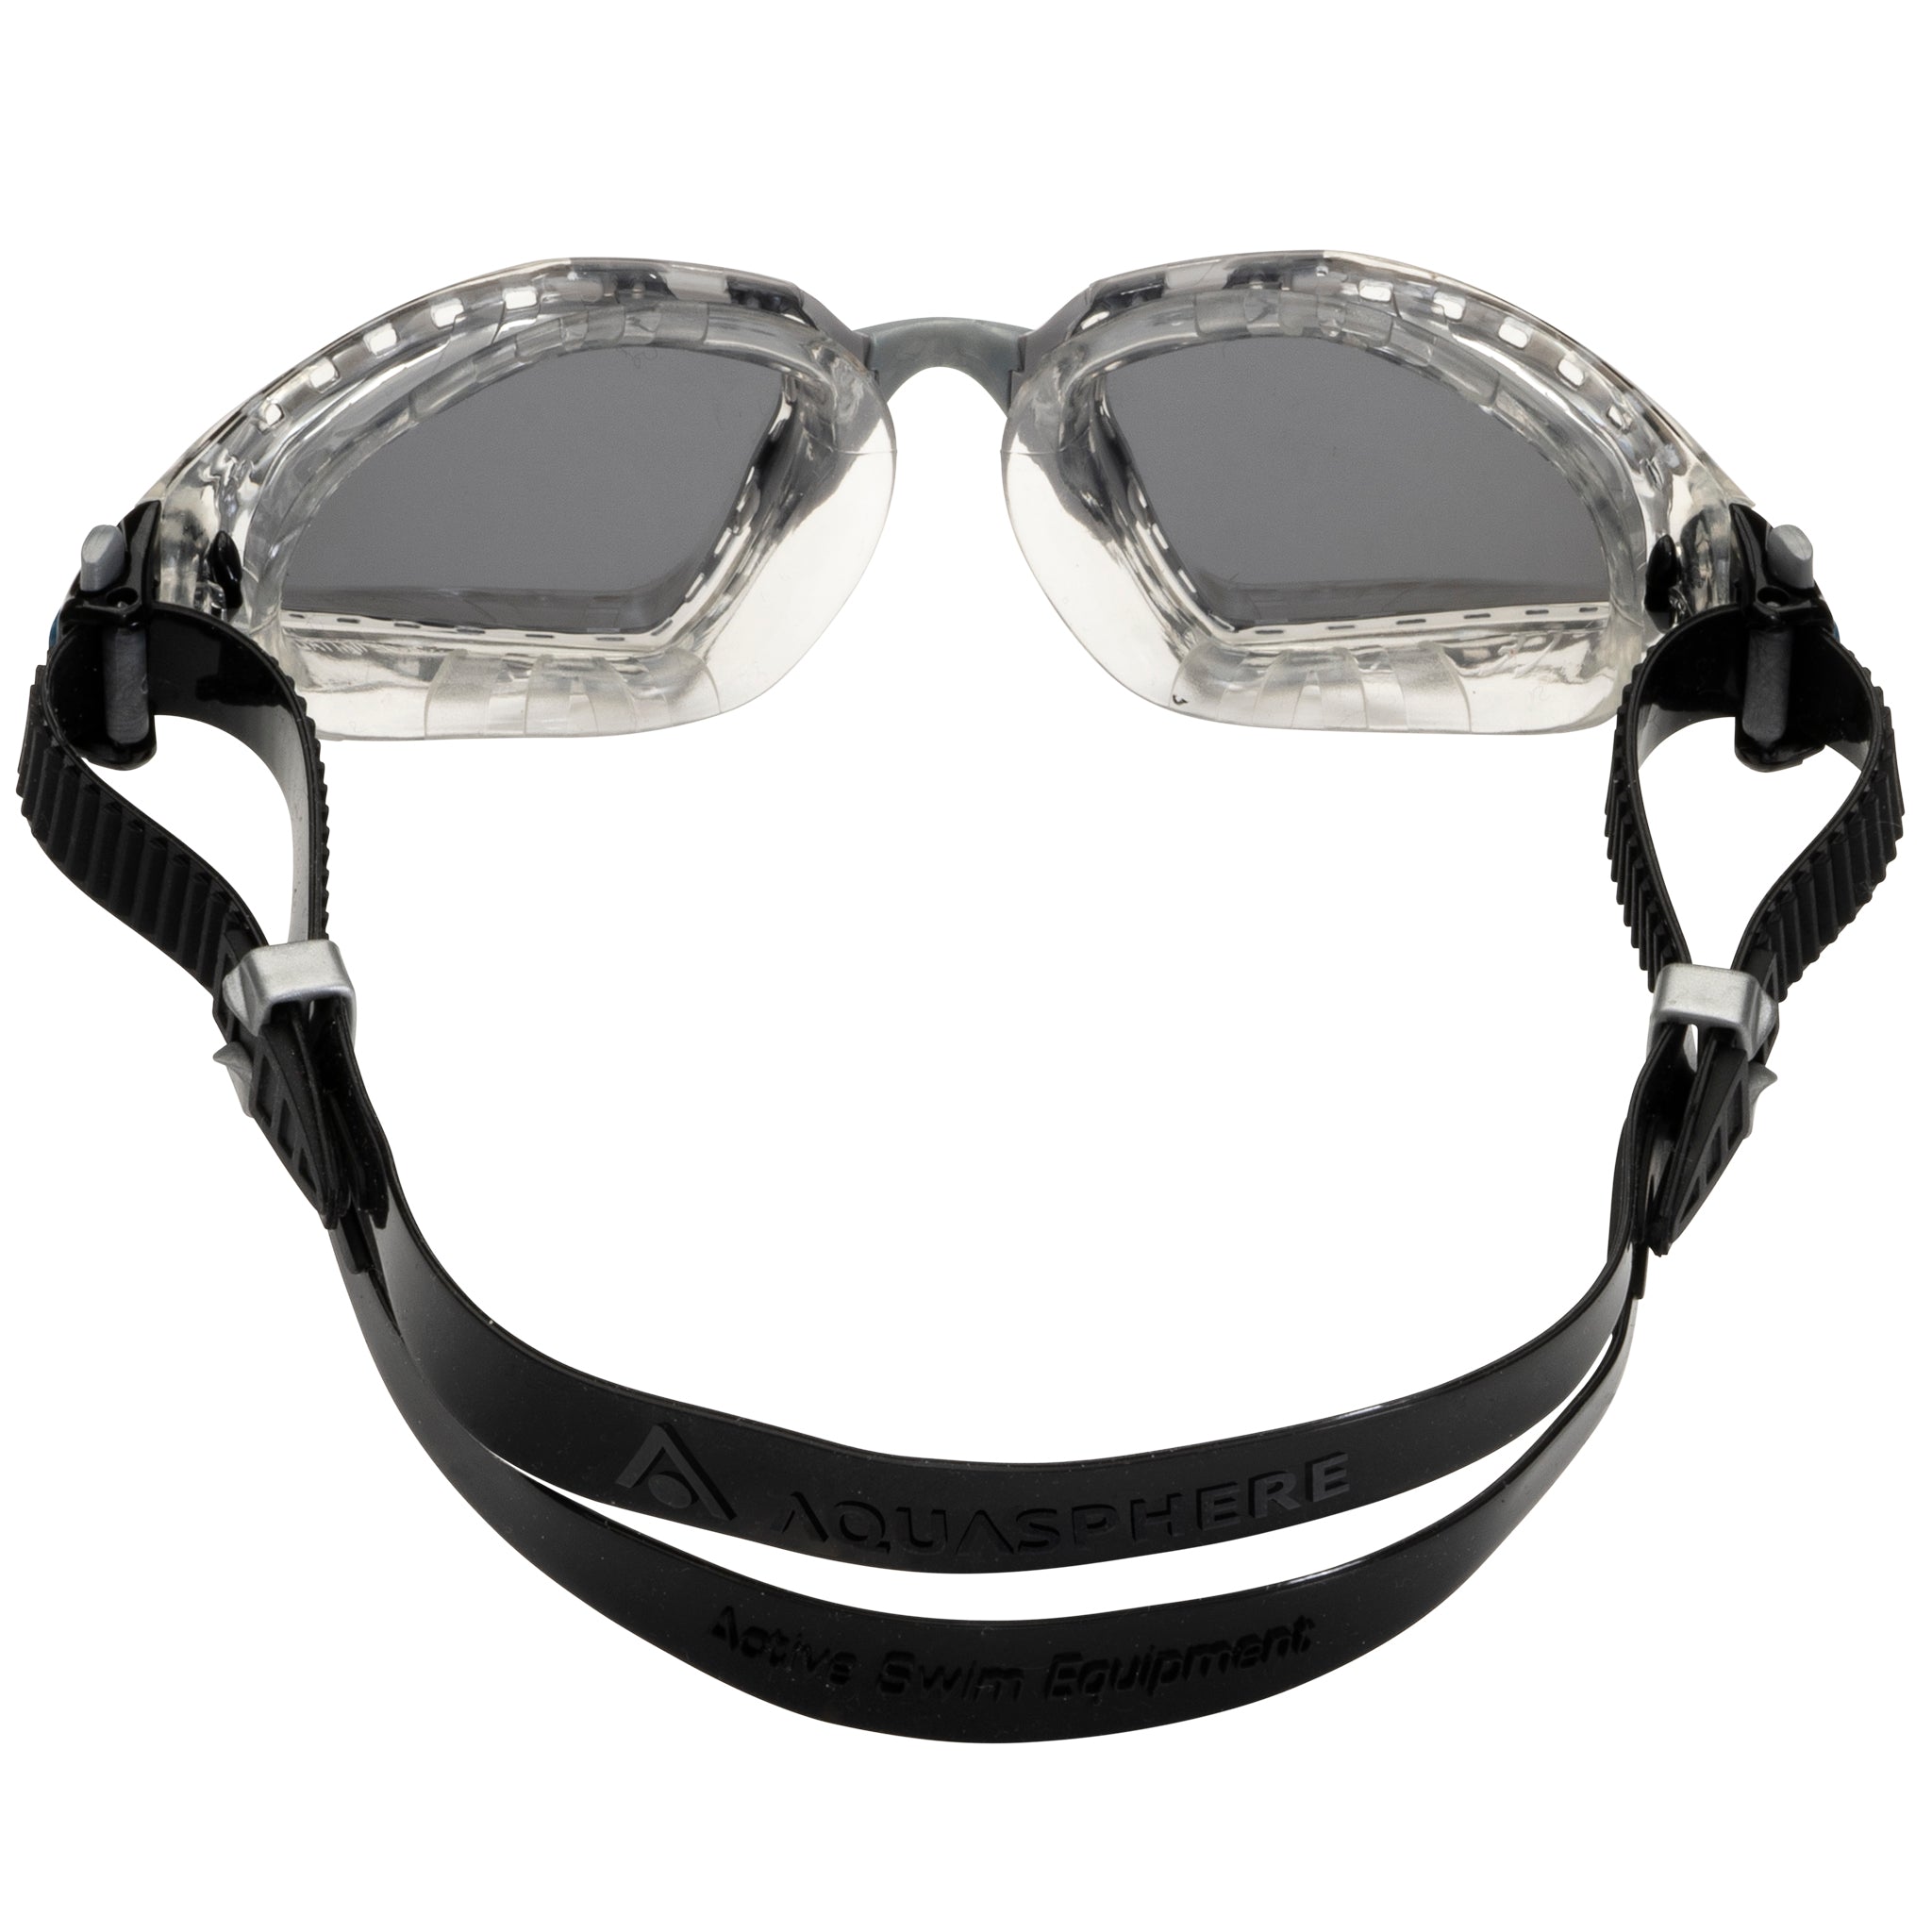 Aquasphere Kayenne Pro Swimming Goggles Silver Mirrored Lenses | Back